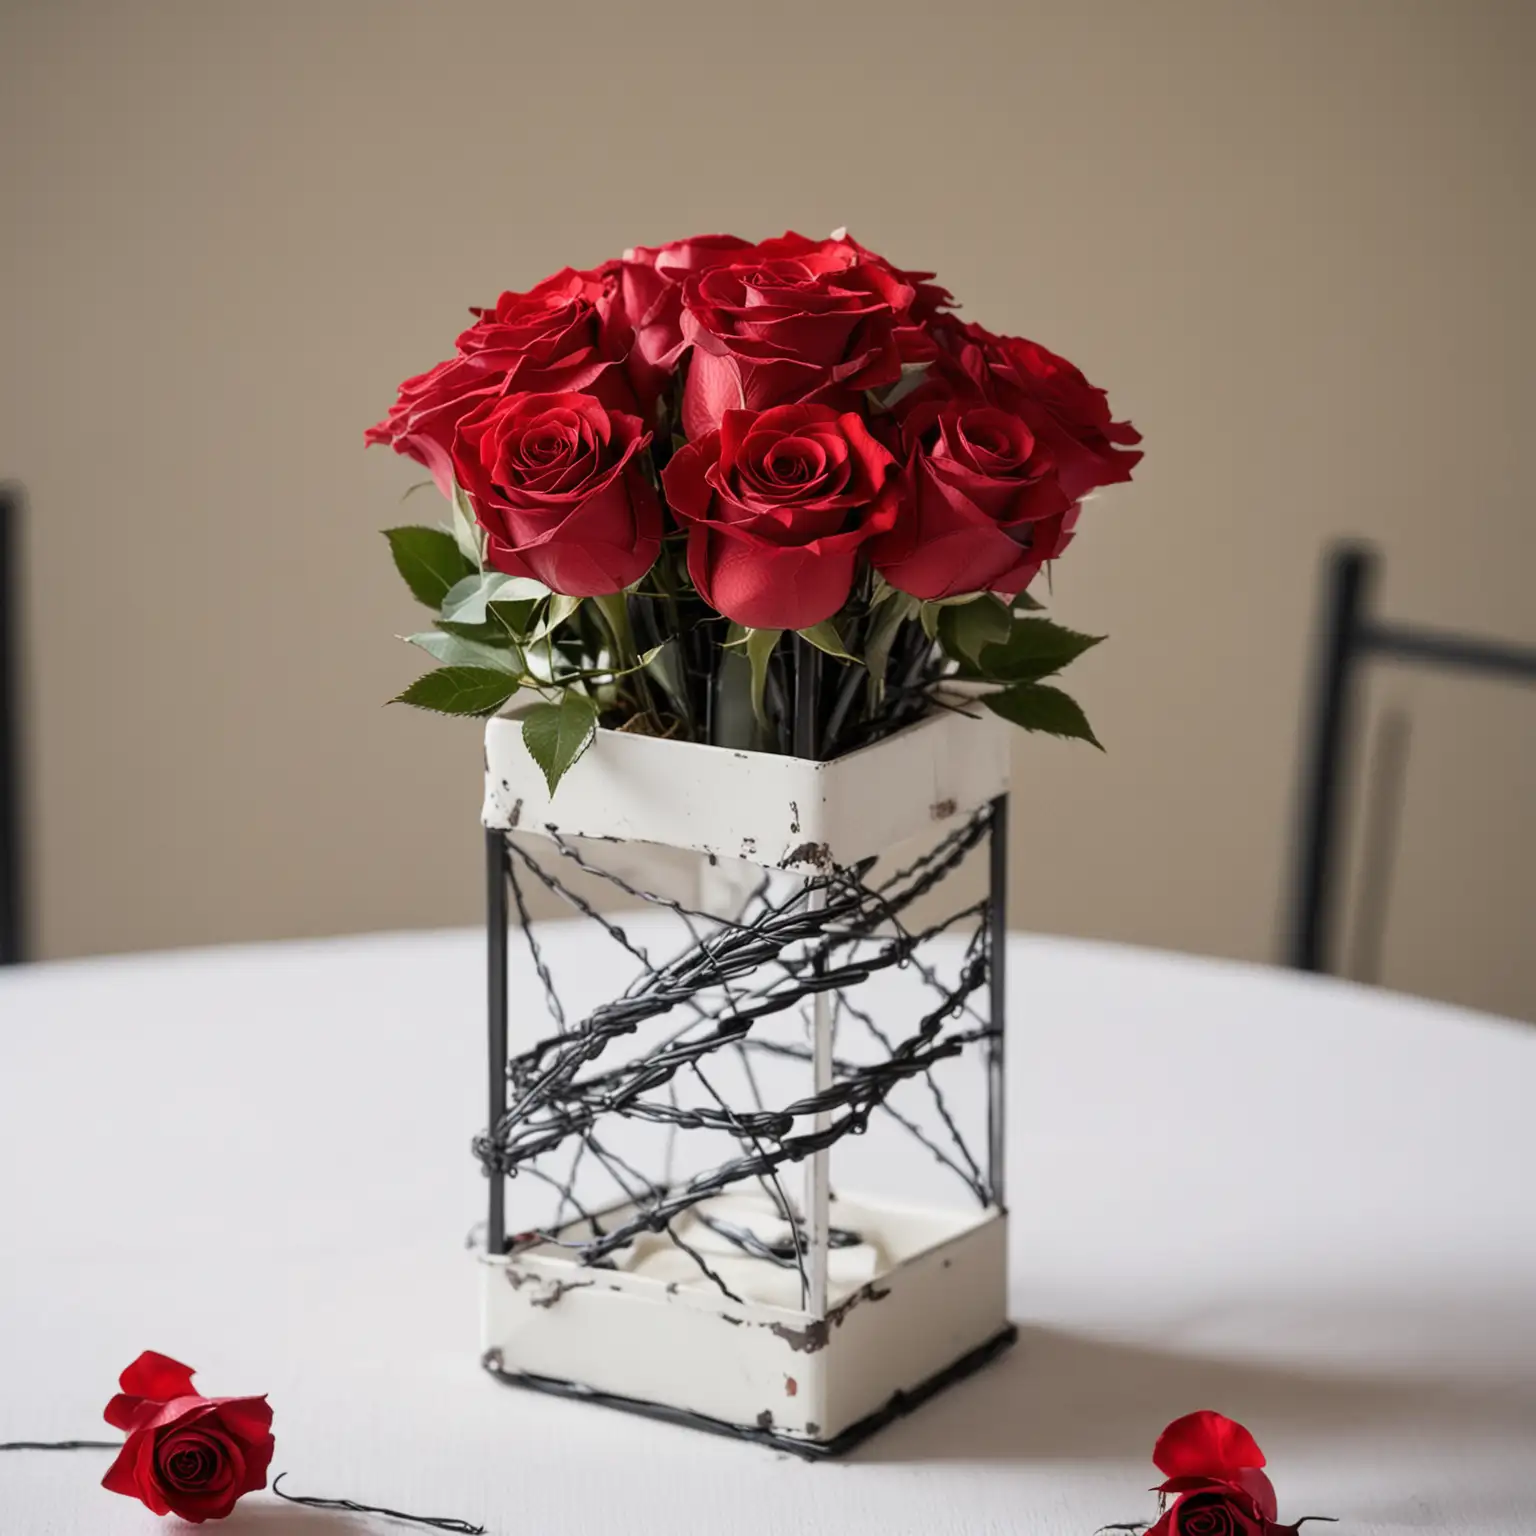 small and simple DIY modern wedding centerpiece with red roses in an edgy white metal vase accented with black sculptural wire